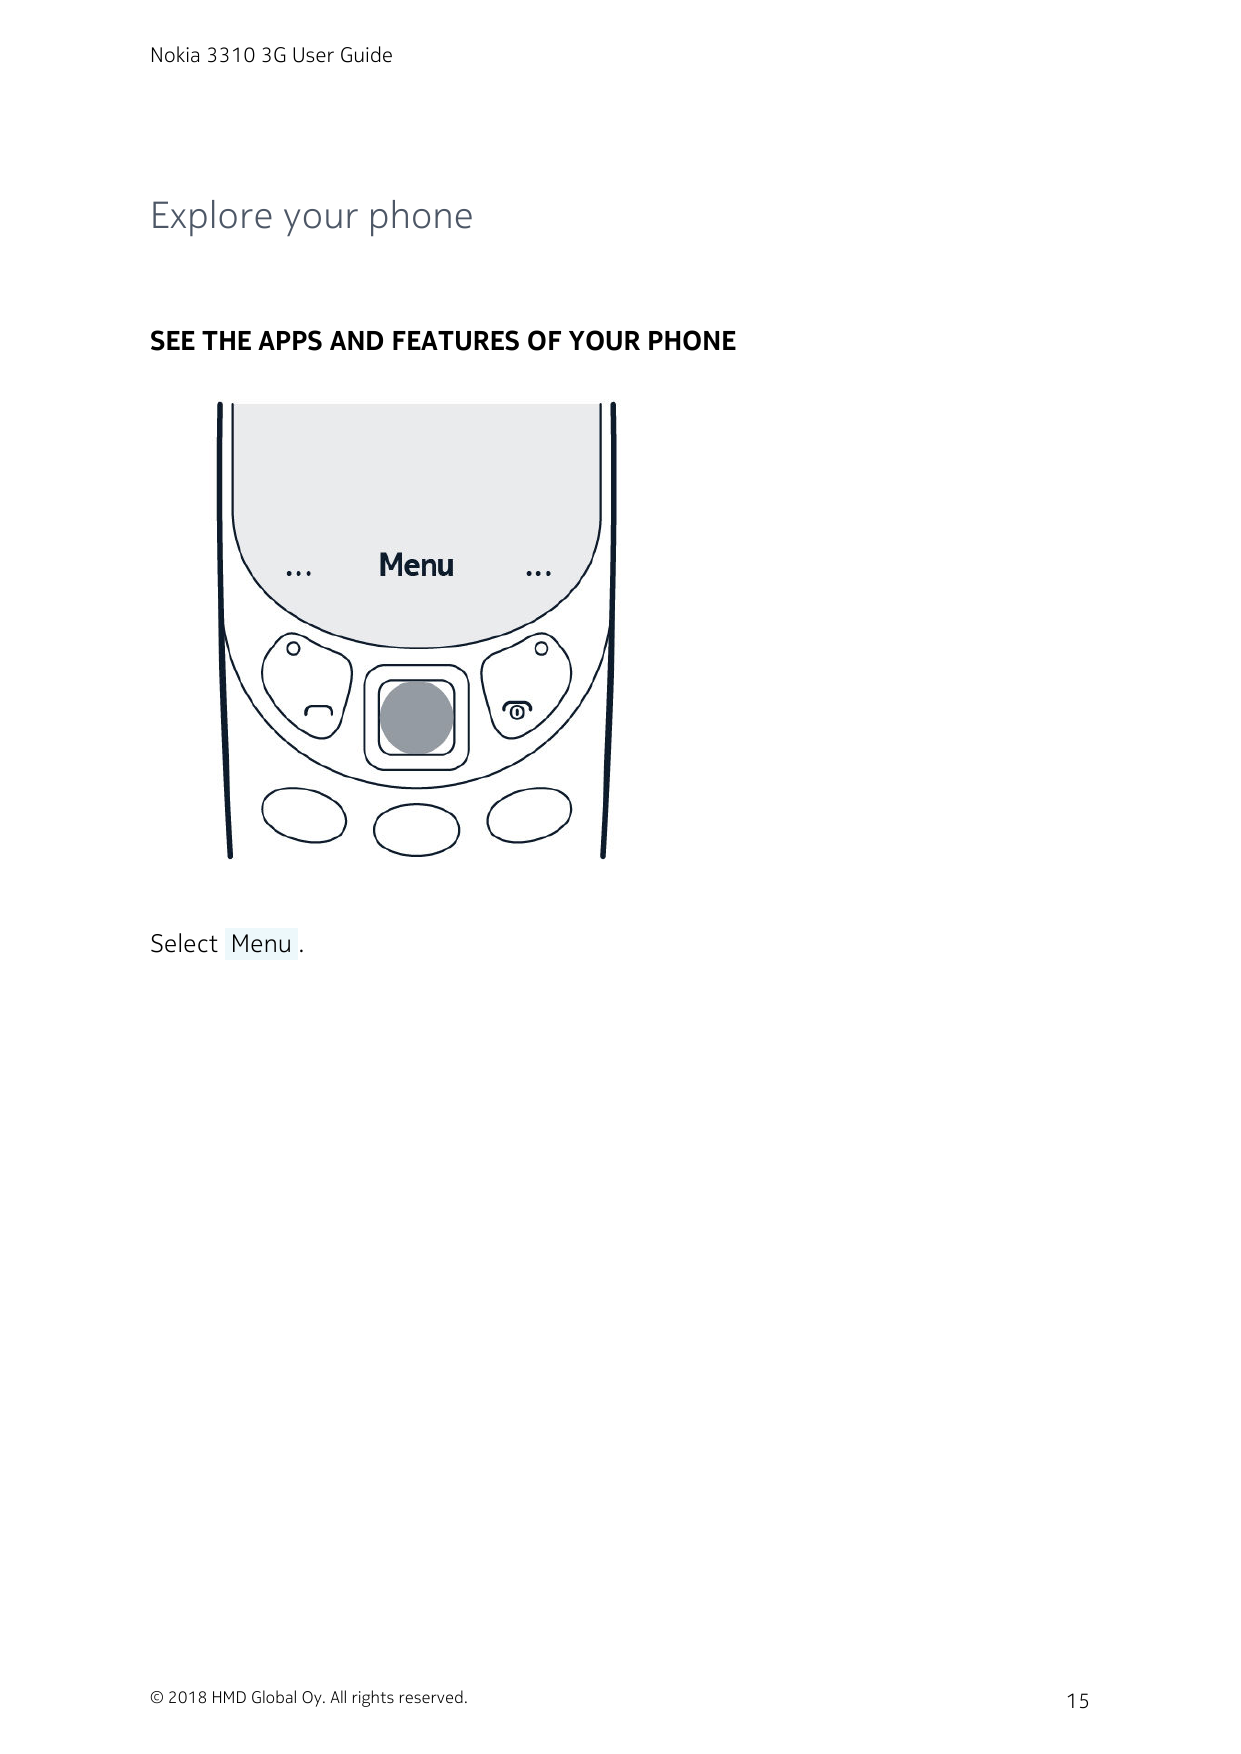 Nokia 3310 3G User GuideExplore your phoneSEE THE APPS AND FEATURES OF YOUR PHONESelect  Menu .© 2018 HMD Global Oy. All rights 